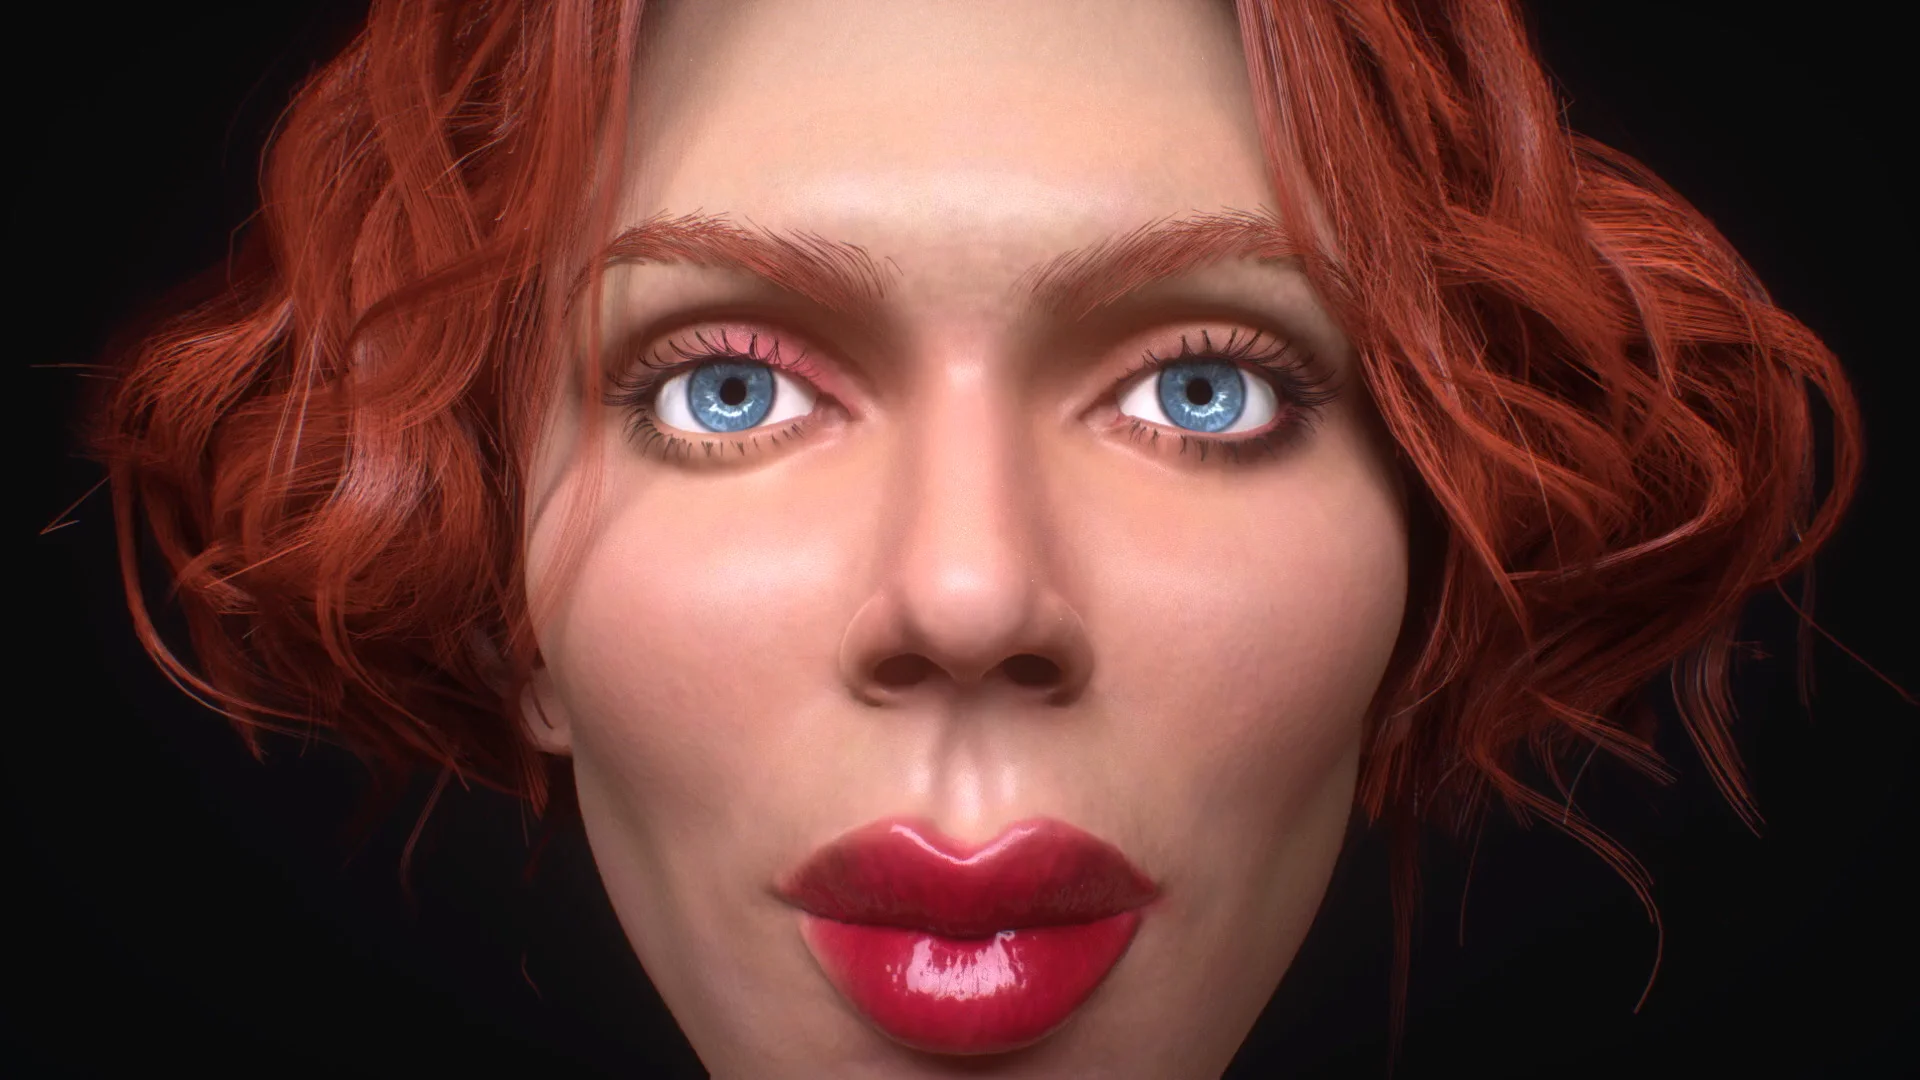 SOPHIE challenges beauty standards in Faceshopping video - HighClouds